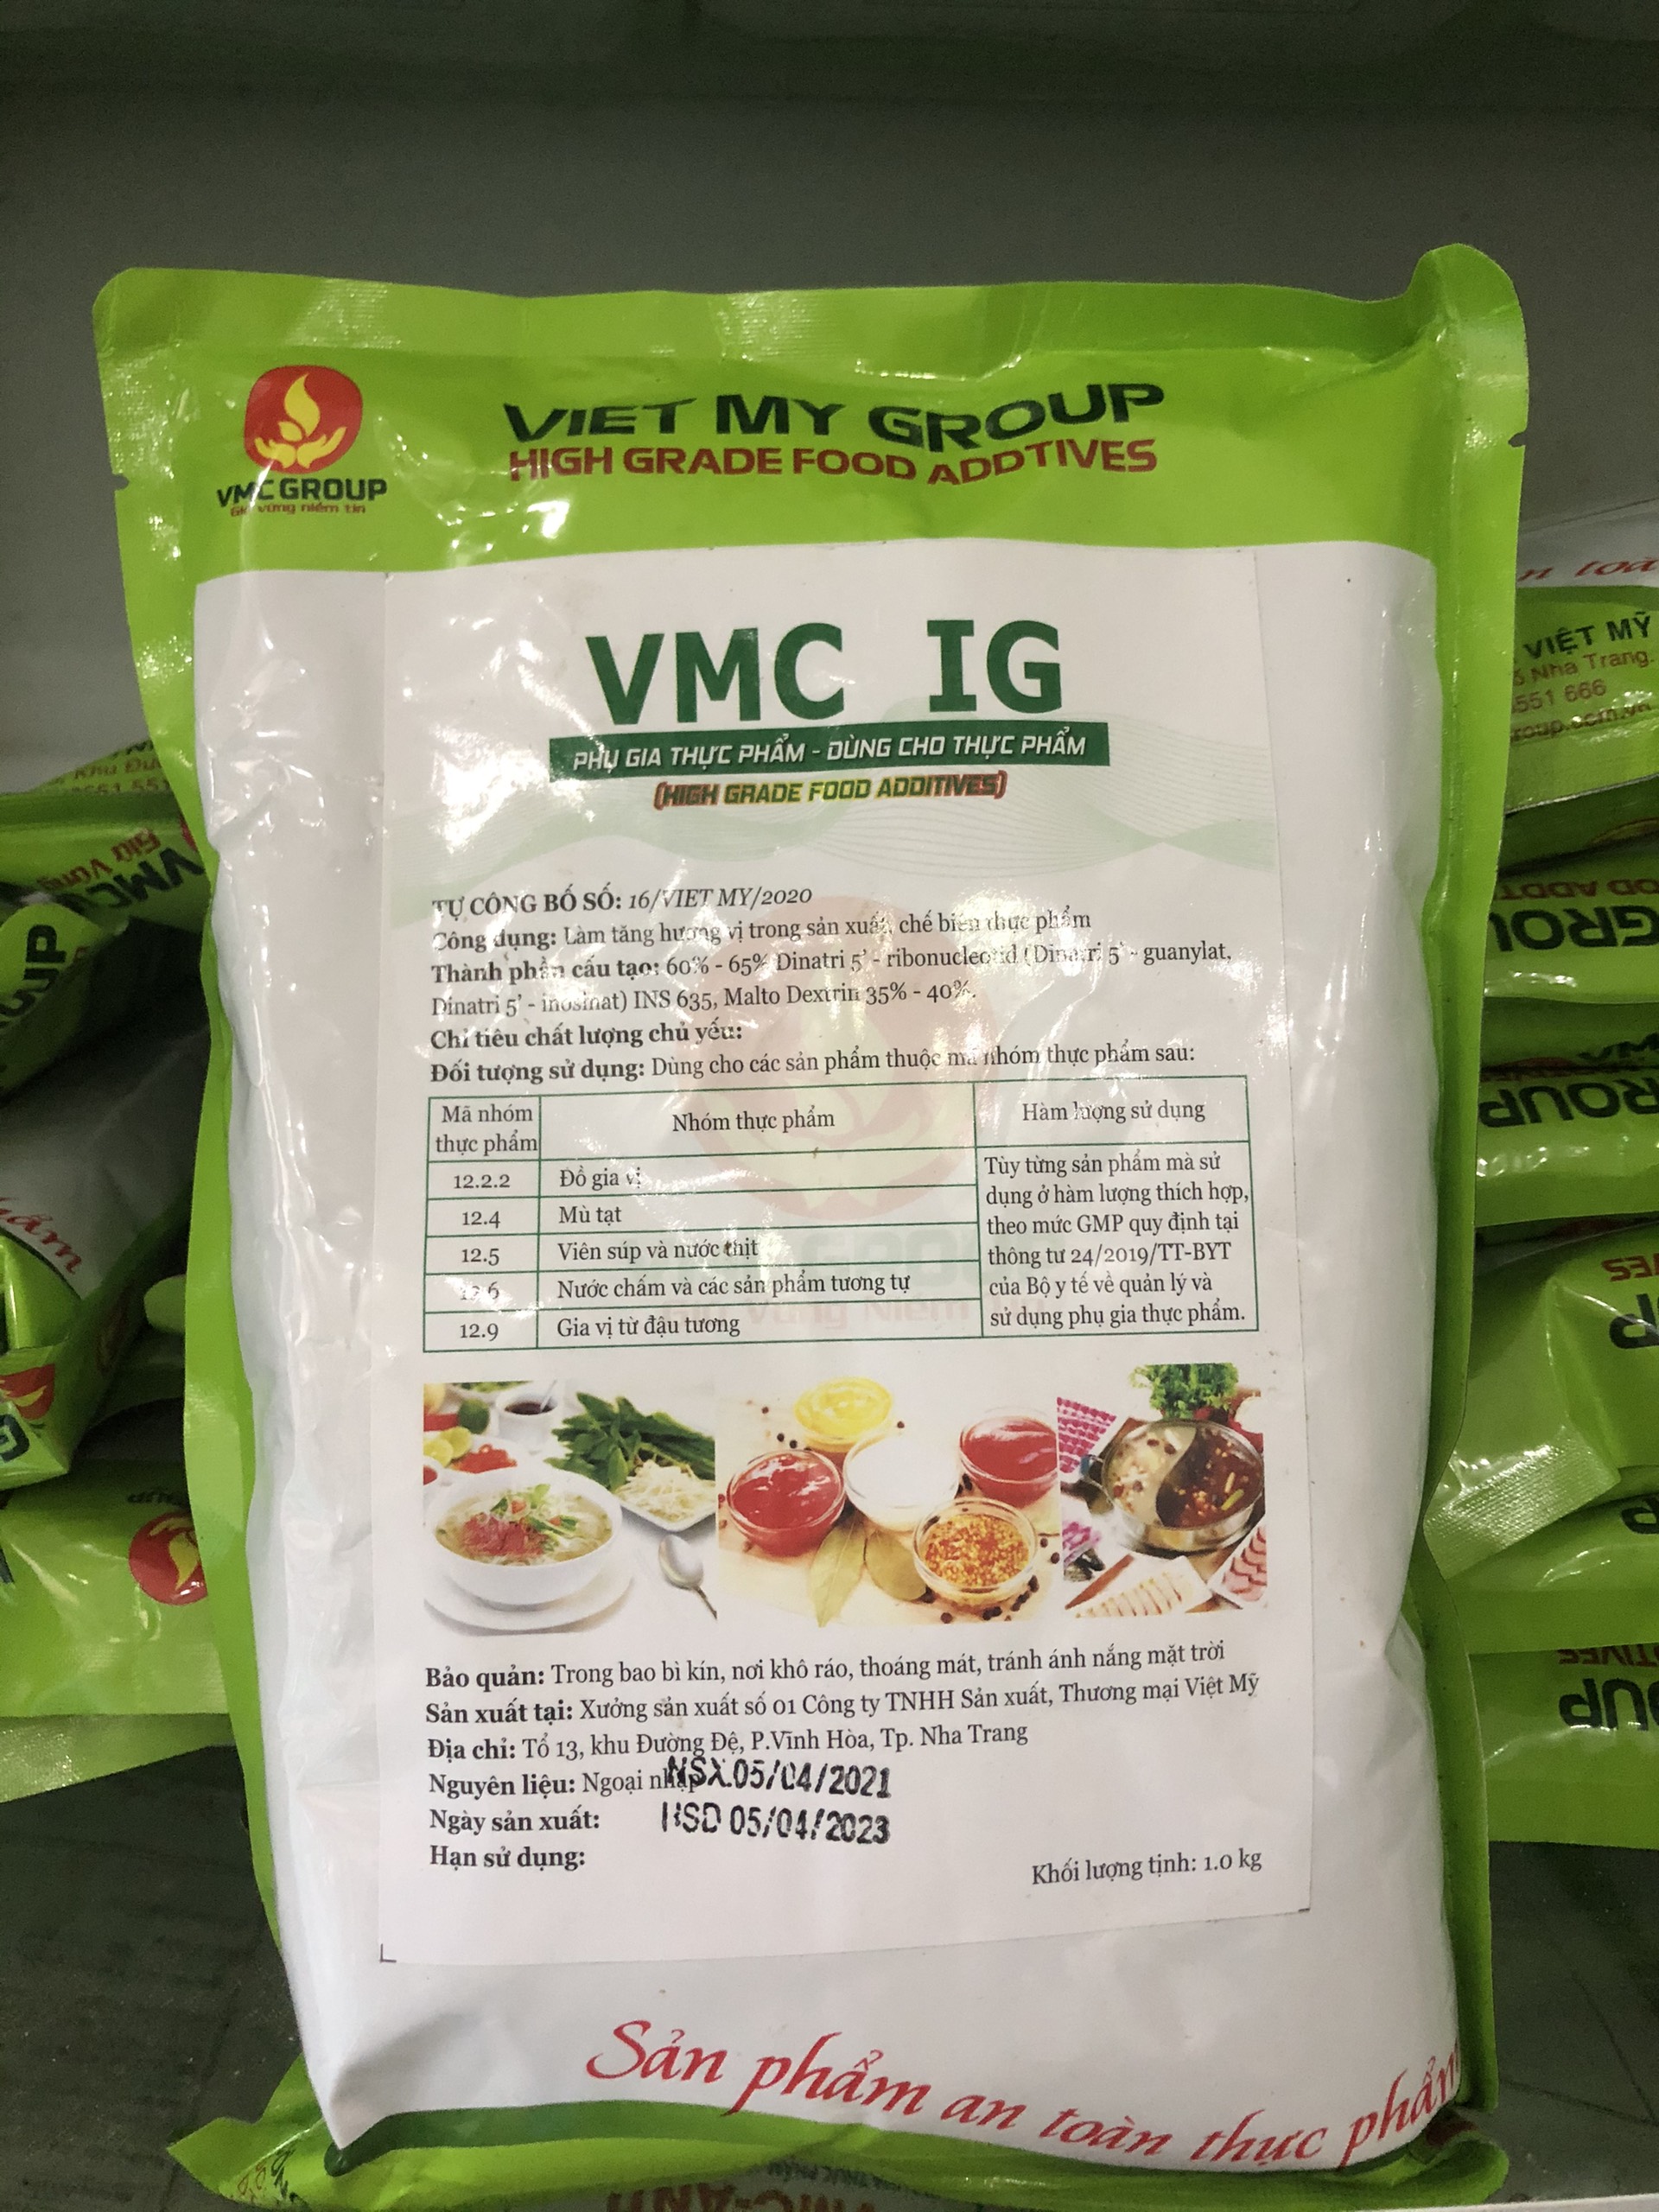 vmc-ig-dung-cho-nuoc-dung-gio-cha-thay-the-my-chinh-2